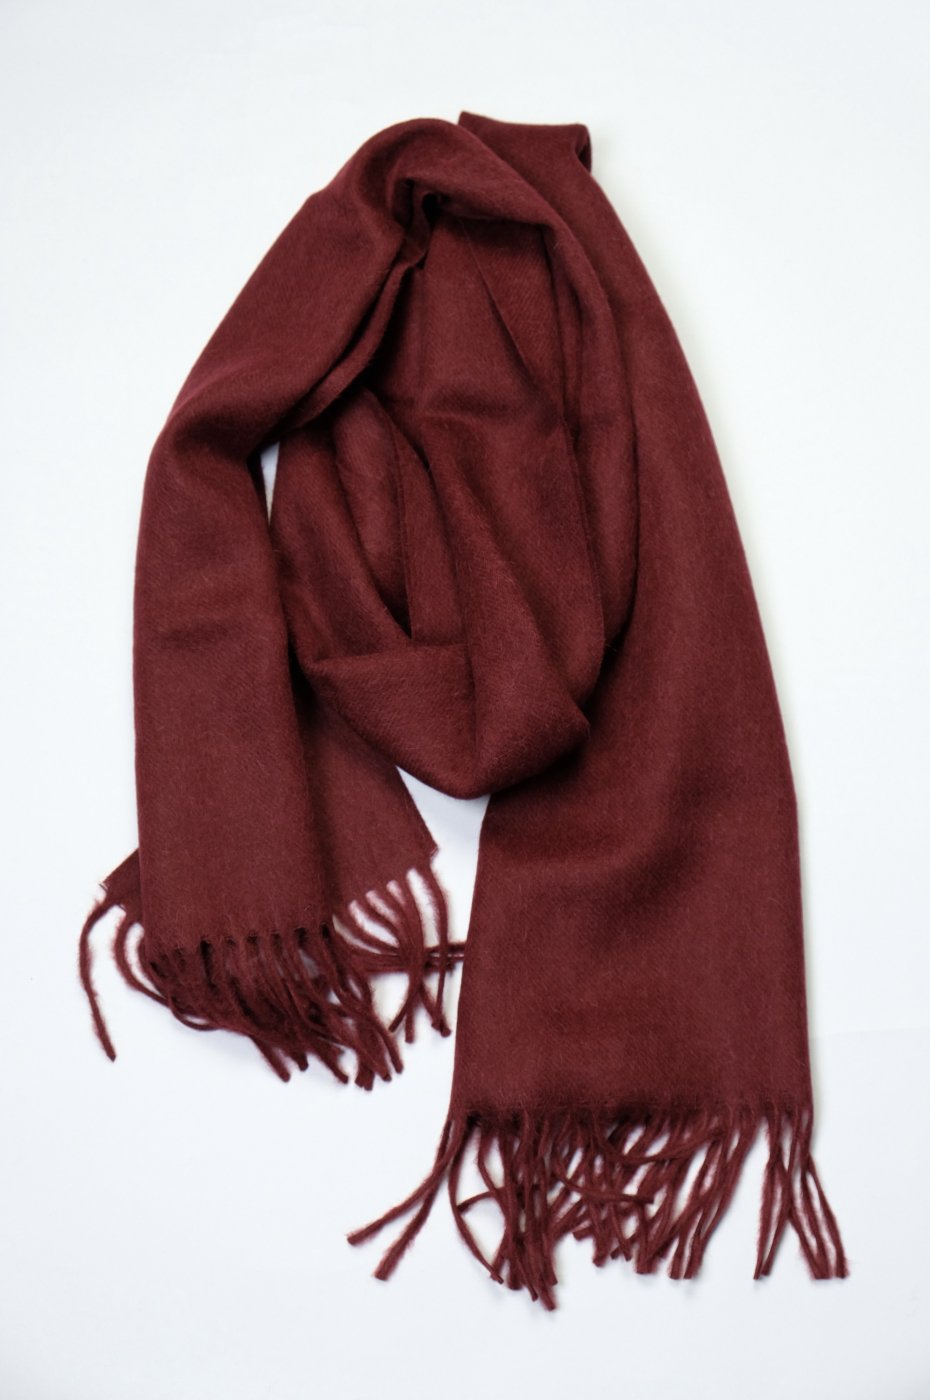 THE INOUE BROTHERS... "BRUSHED SCARF/BURGUNDY"